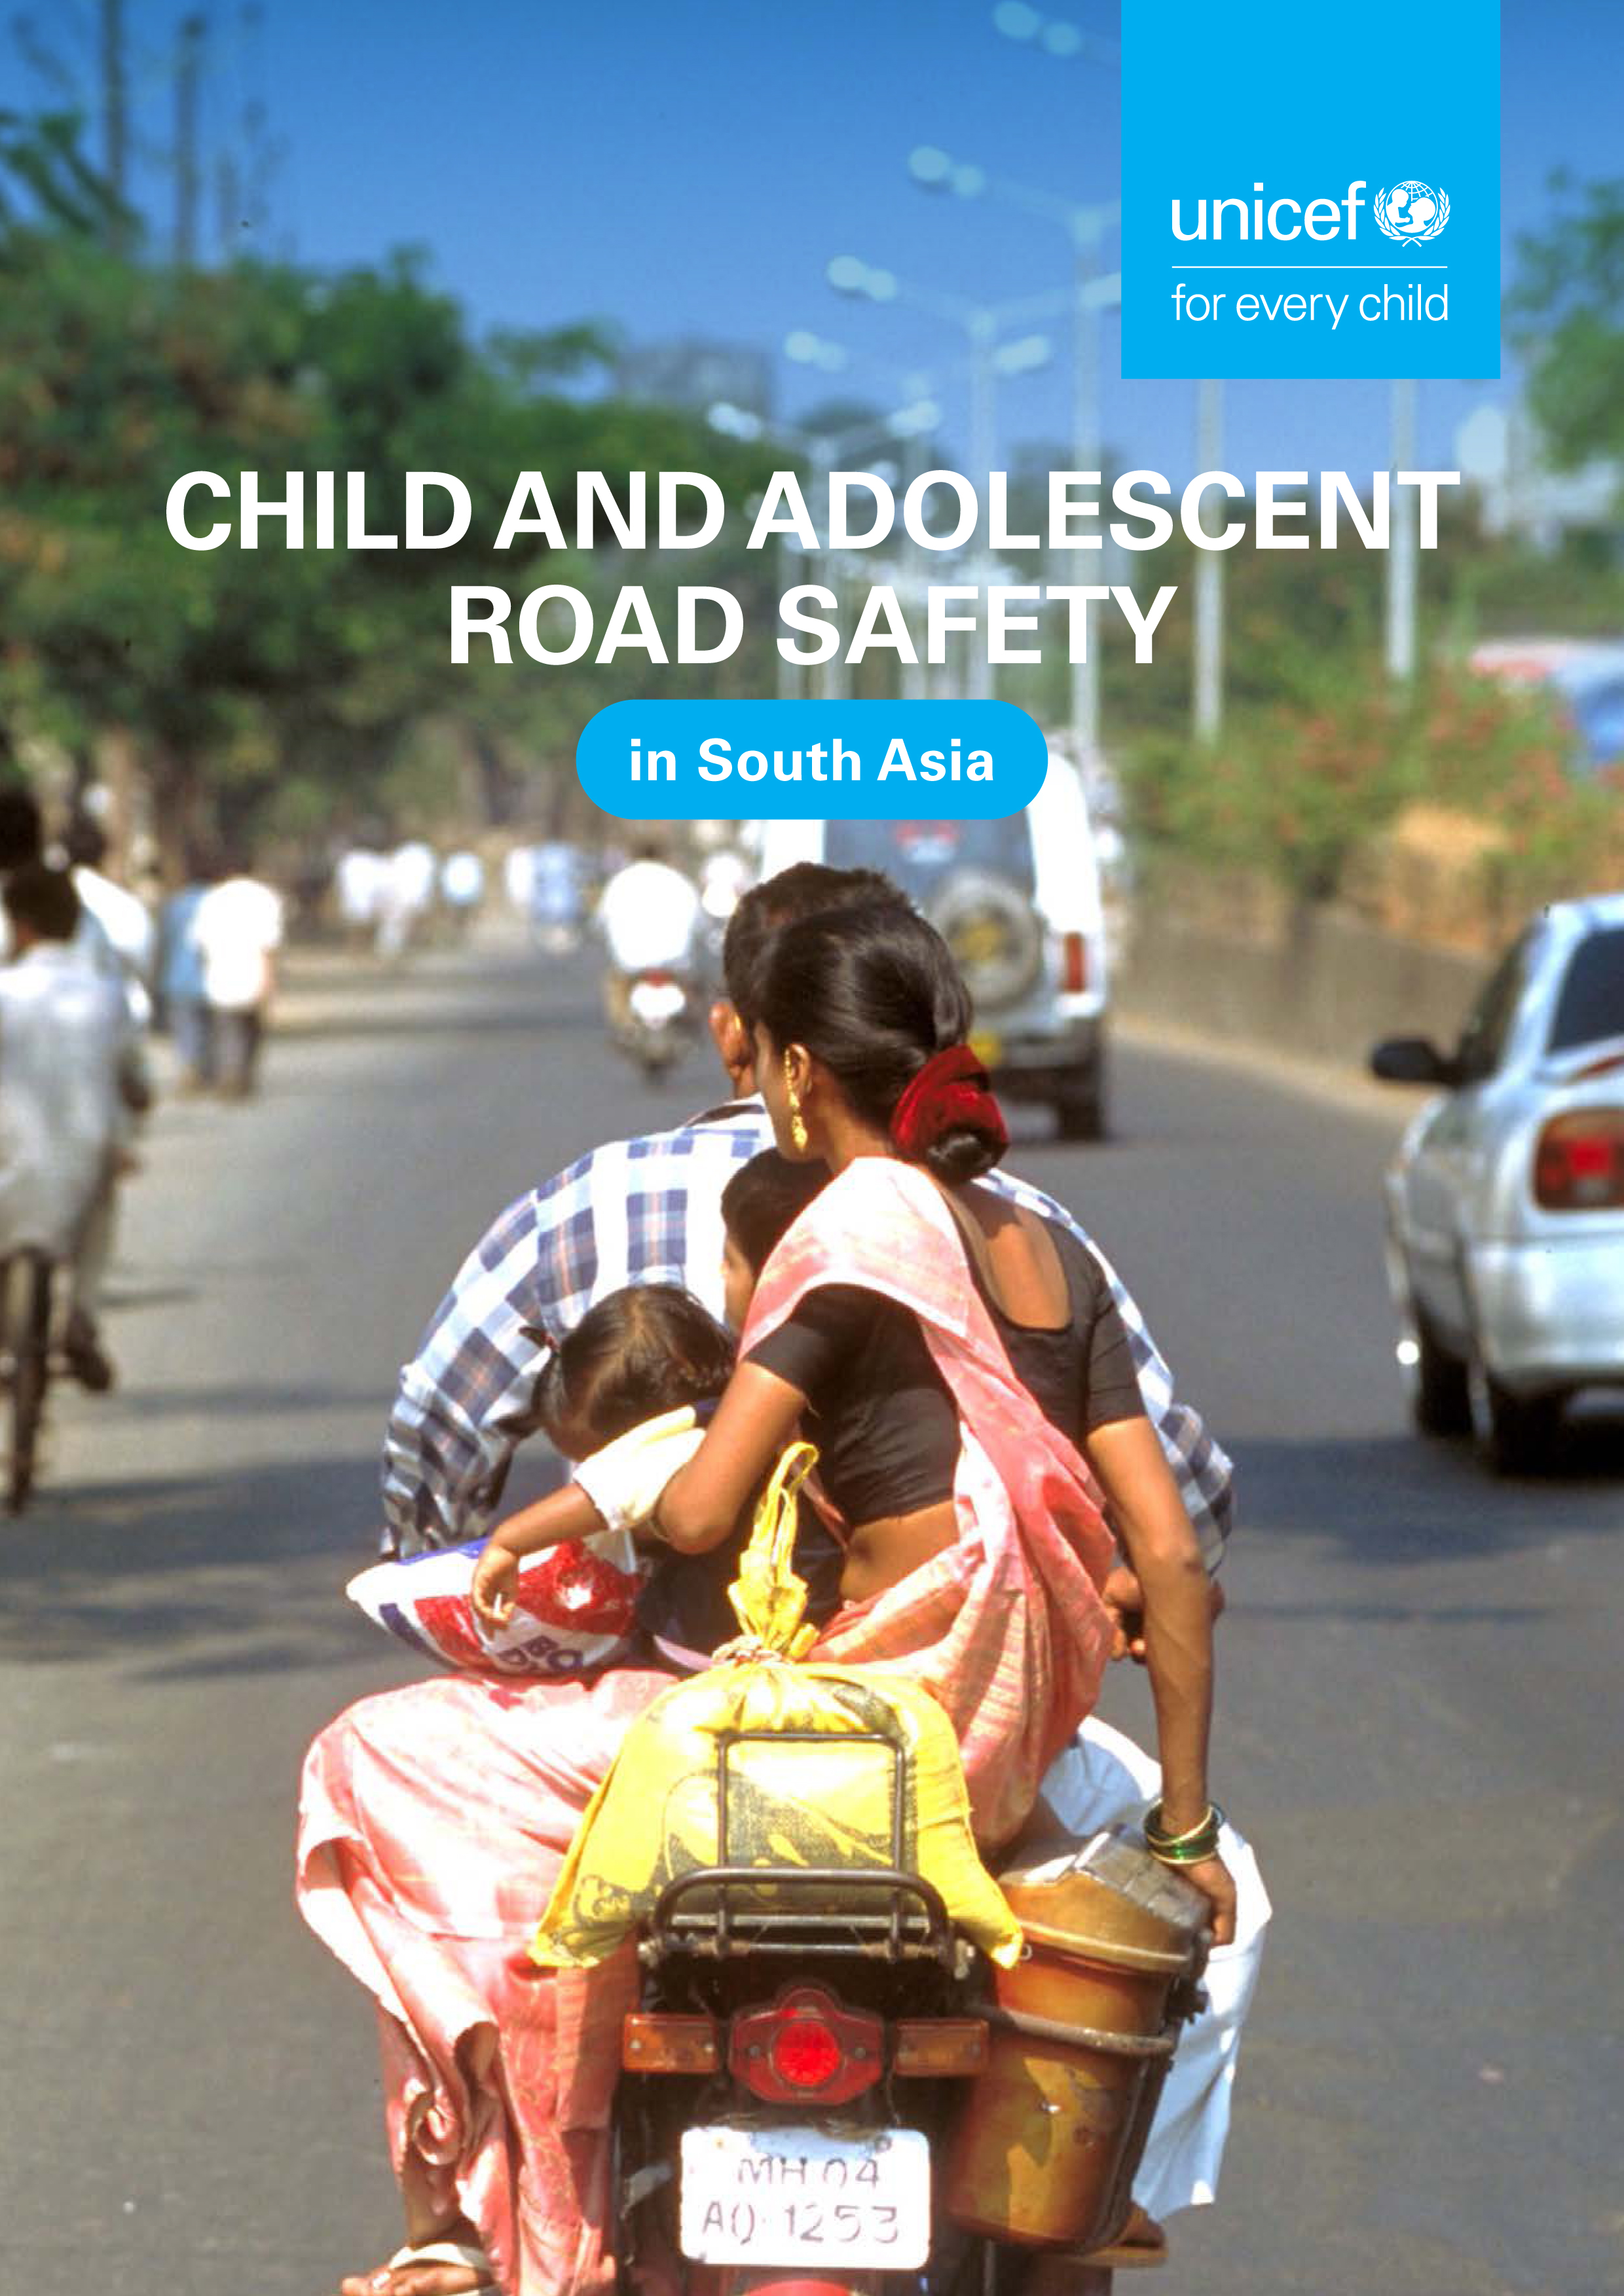 image of Child and adolescent road traffic situation in South Asia